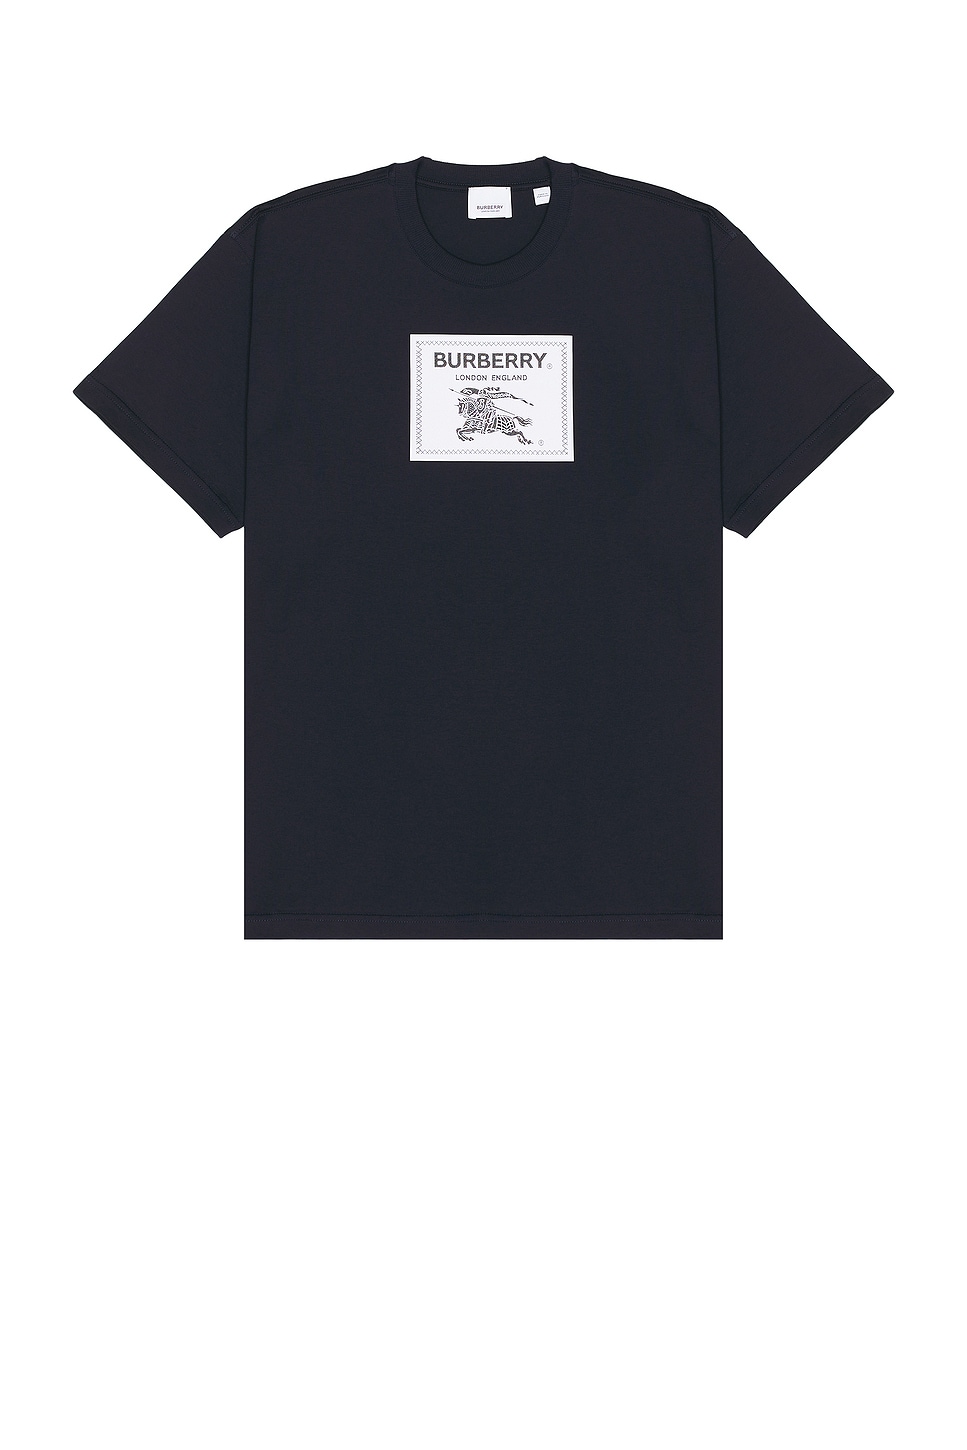 Image 1 of Burberry Roundwood Label T-shirt in Smoked Navy